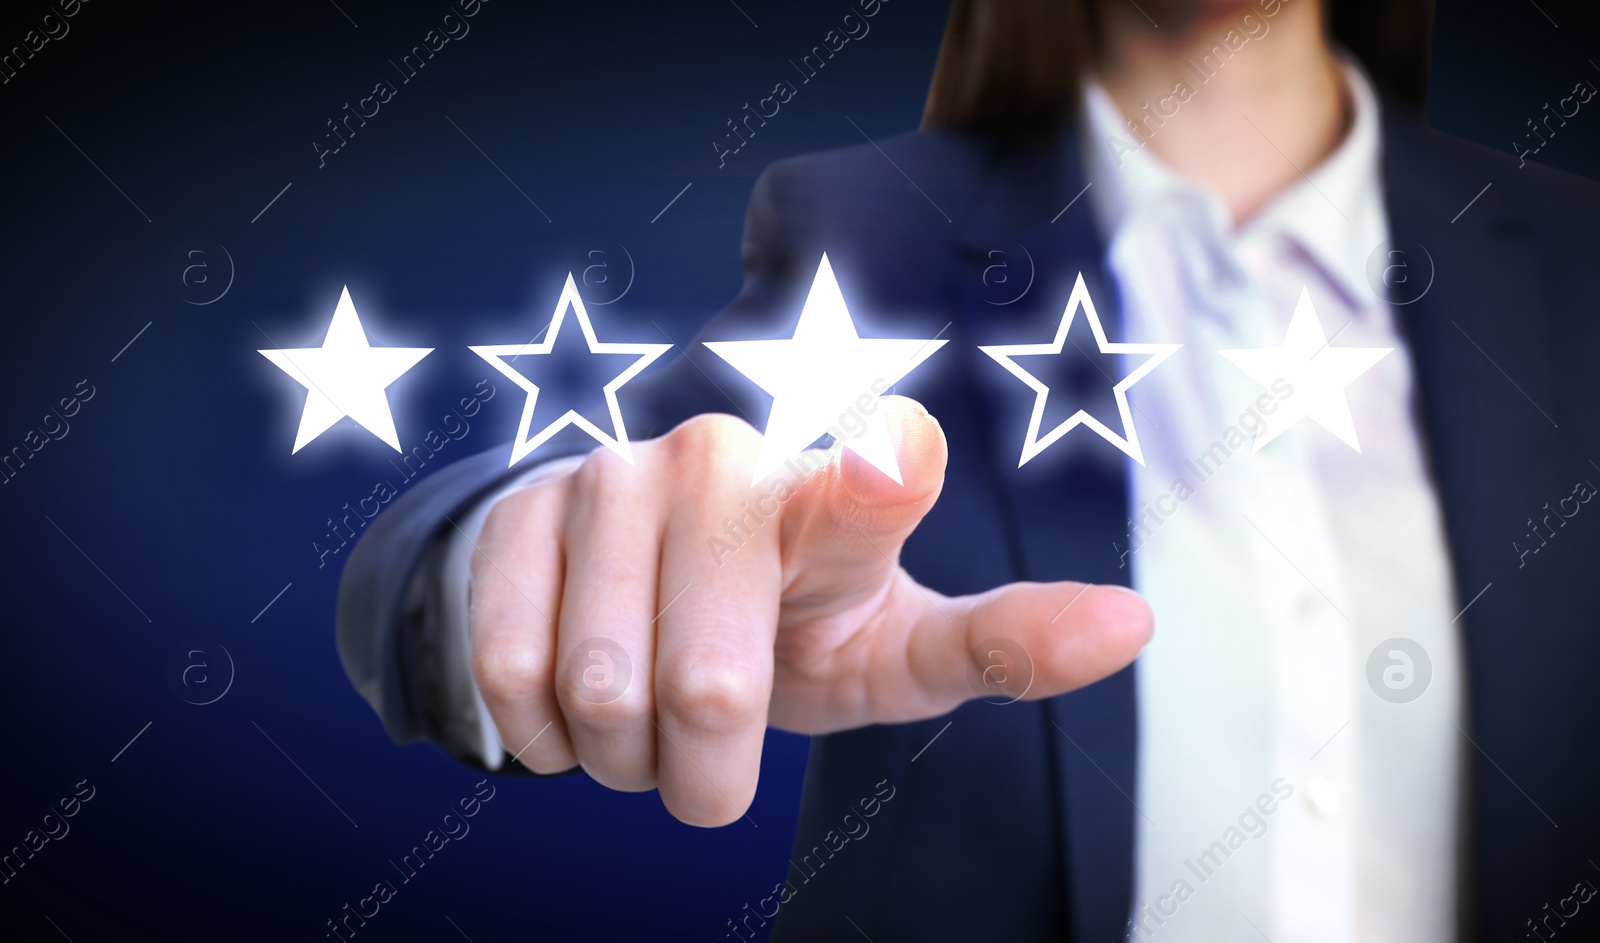 Image of Quality rating. Woman pointing at stars on virtual screen against dark background, closeup